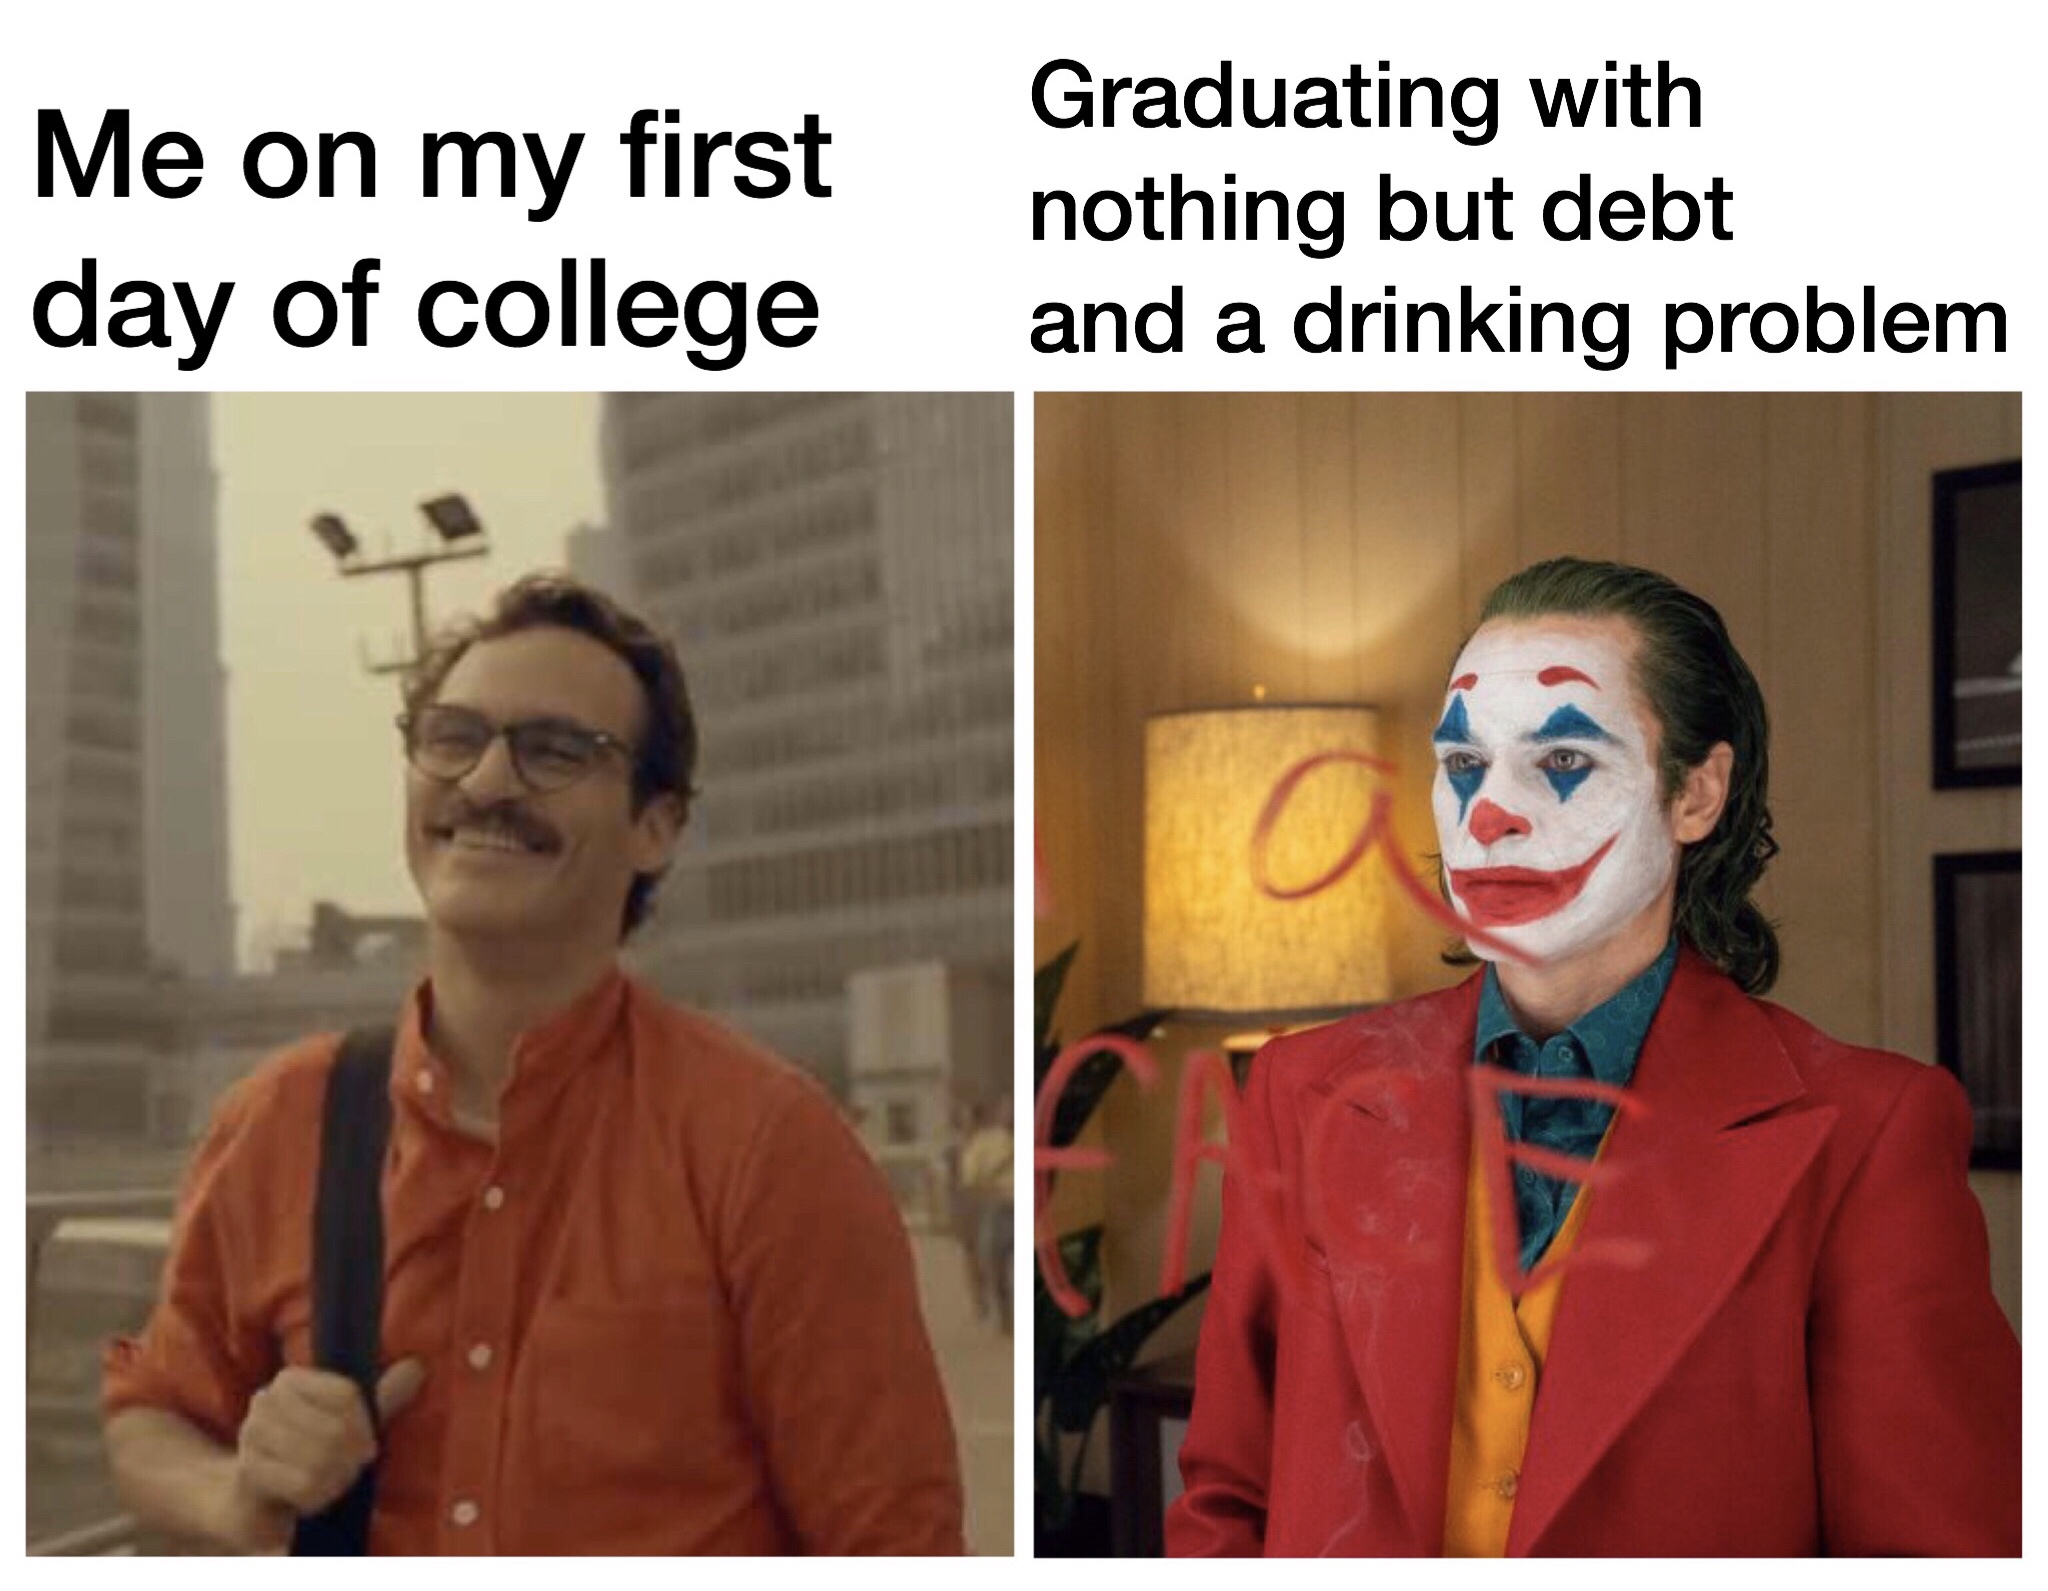 clown - Me on my first day of college Graduating with nothing but debt and a drinking problem